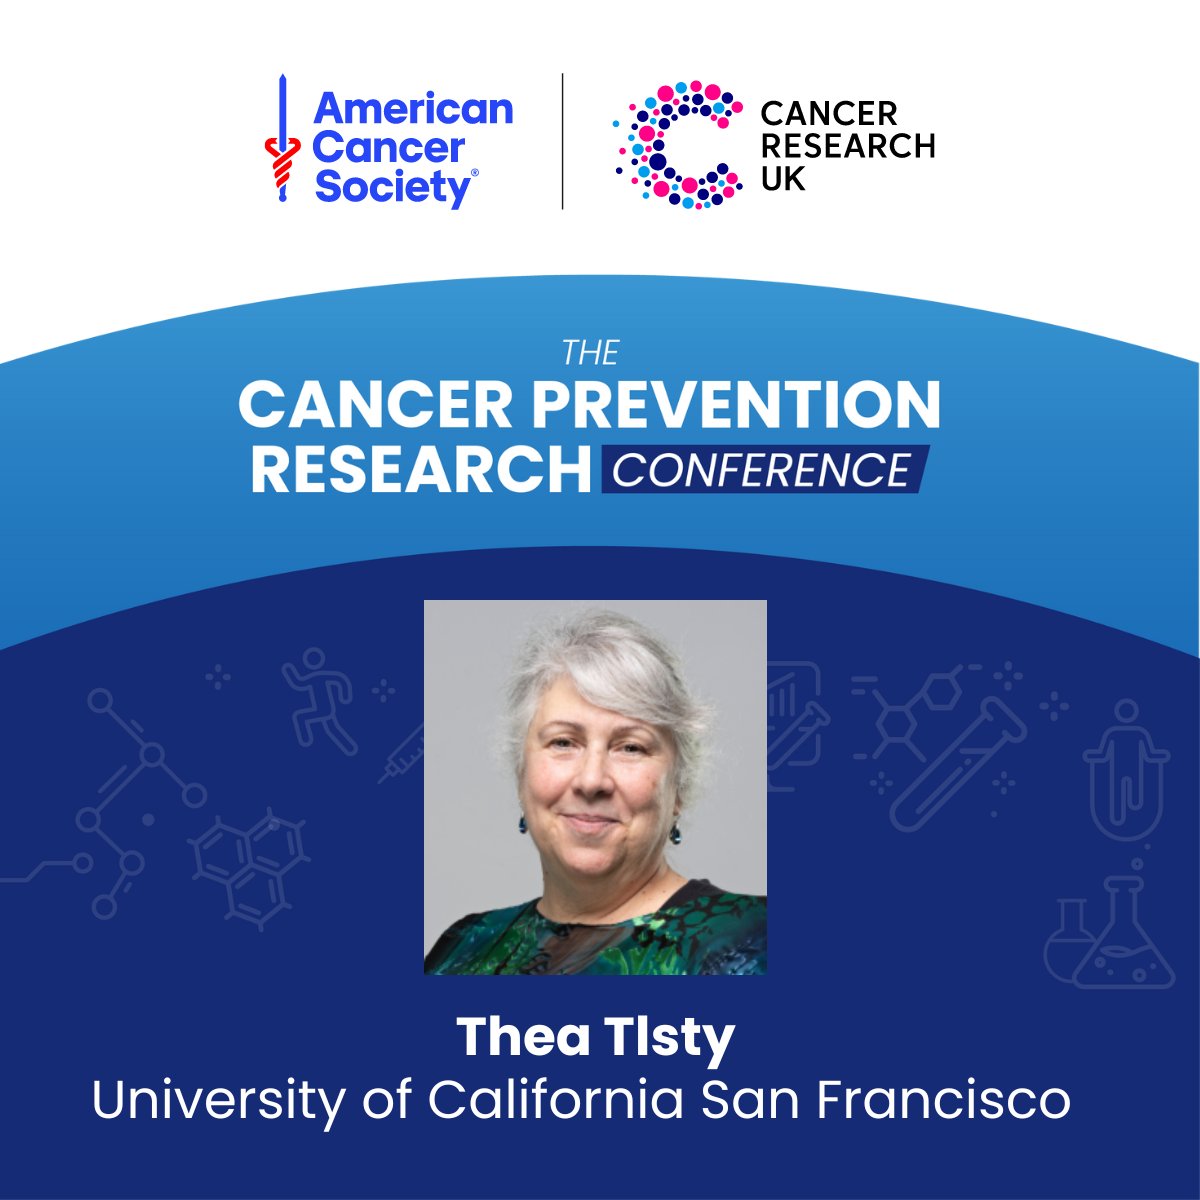 Also joining the session at #PrevConf24 is Thea Tlsty. Thea’s lab was the first to develop biomarkers for risk stratification of ductal carcinoma in situ, a pre-malignant lesion of #BreastCancer. bit.ly/4b4Adj2 @UCSFCancer | @UCSF